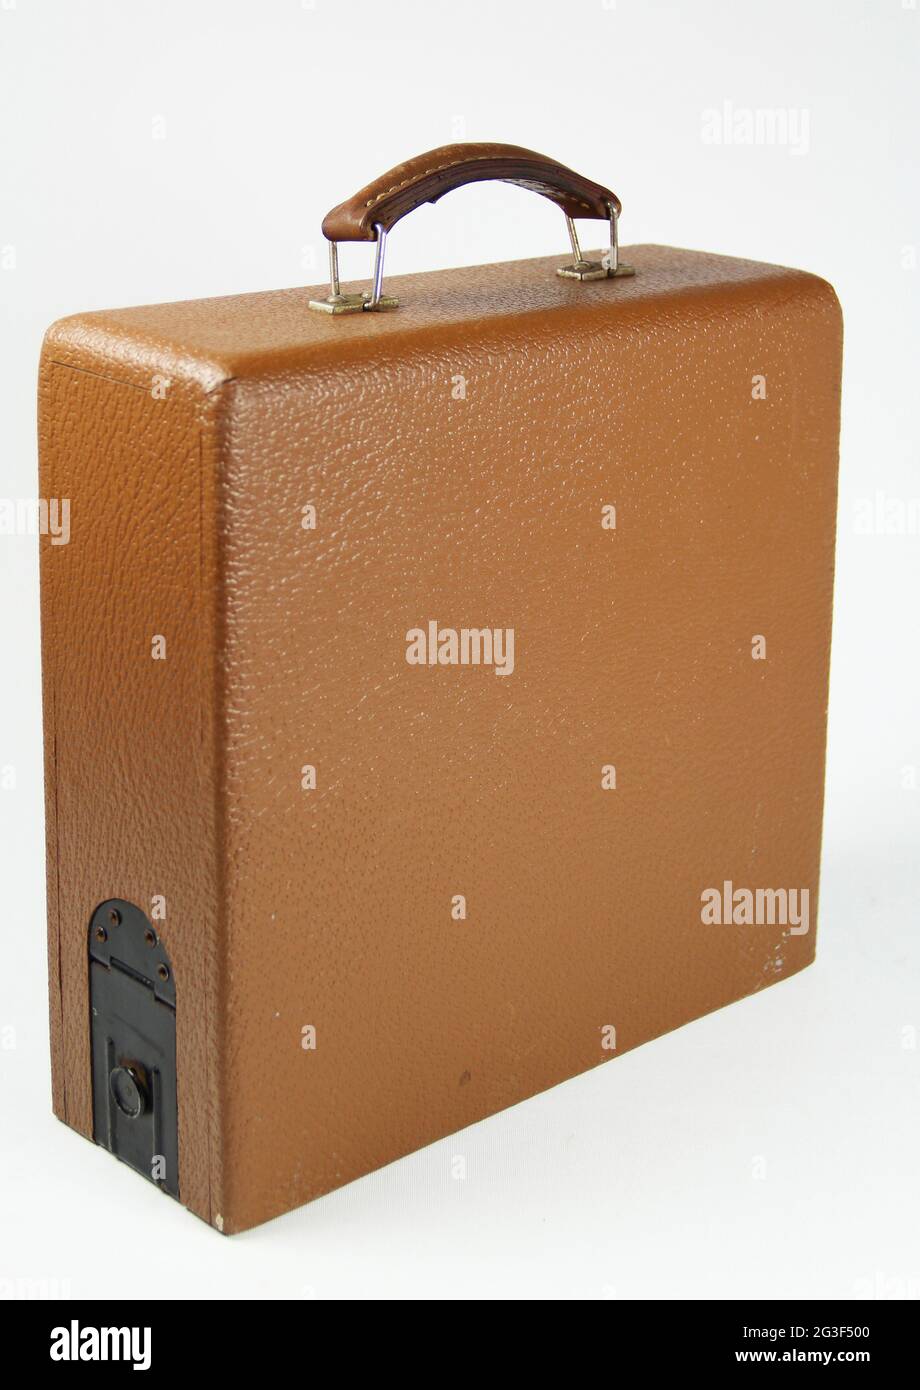 technique, foldable electrical portable sewing machine KOMA, wooden suitcase with leatherette cover, ADDITIONAL-RIGHTS-CLEARANCE-INFO-NOT-AVAILABLE Stock Photo